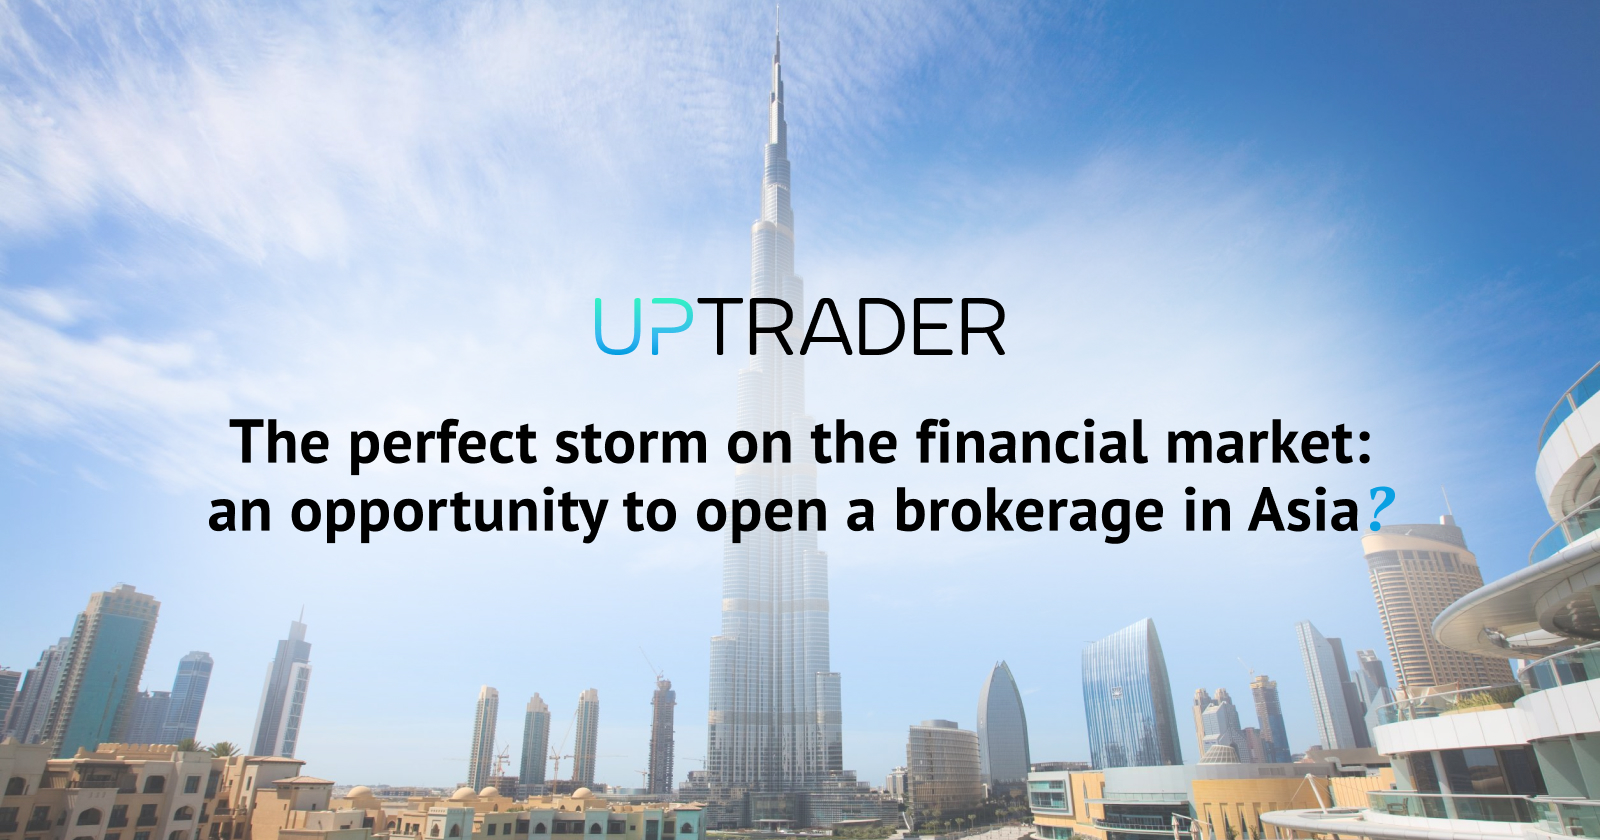 The perfect storm on the financial market: an opportunity to open a brokerage in Asia?